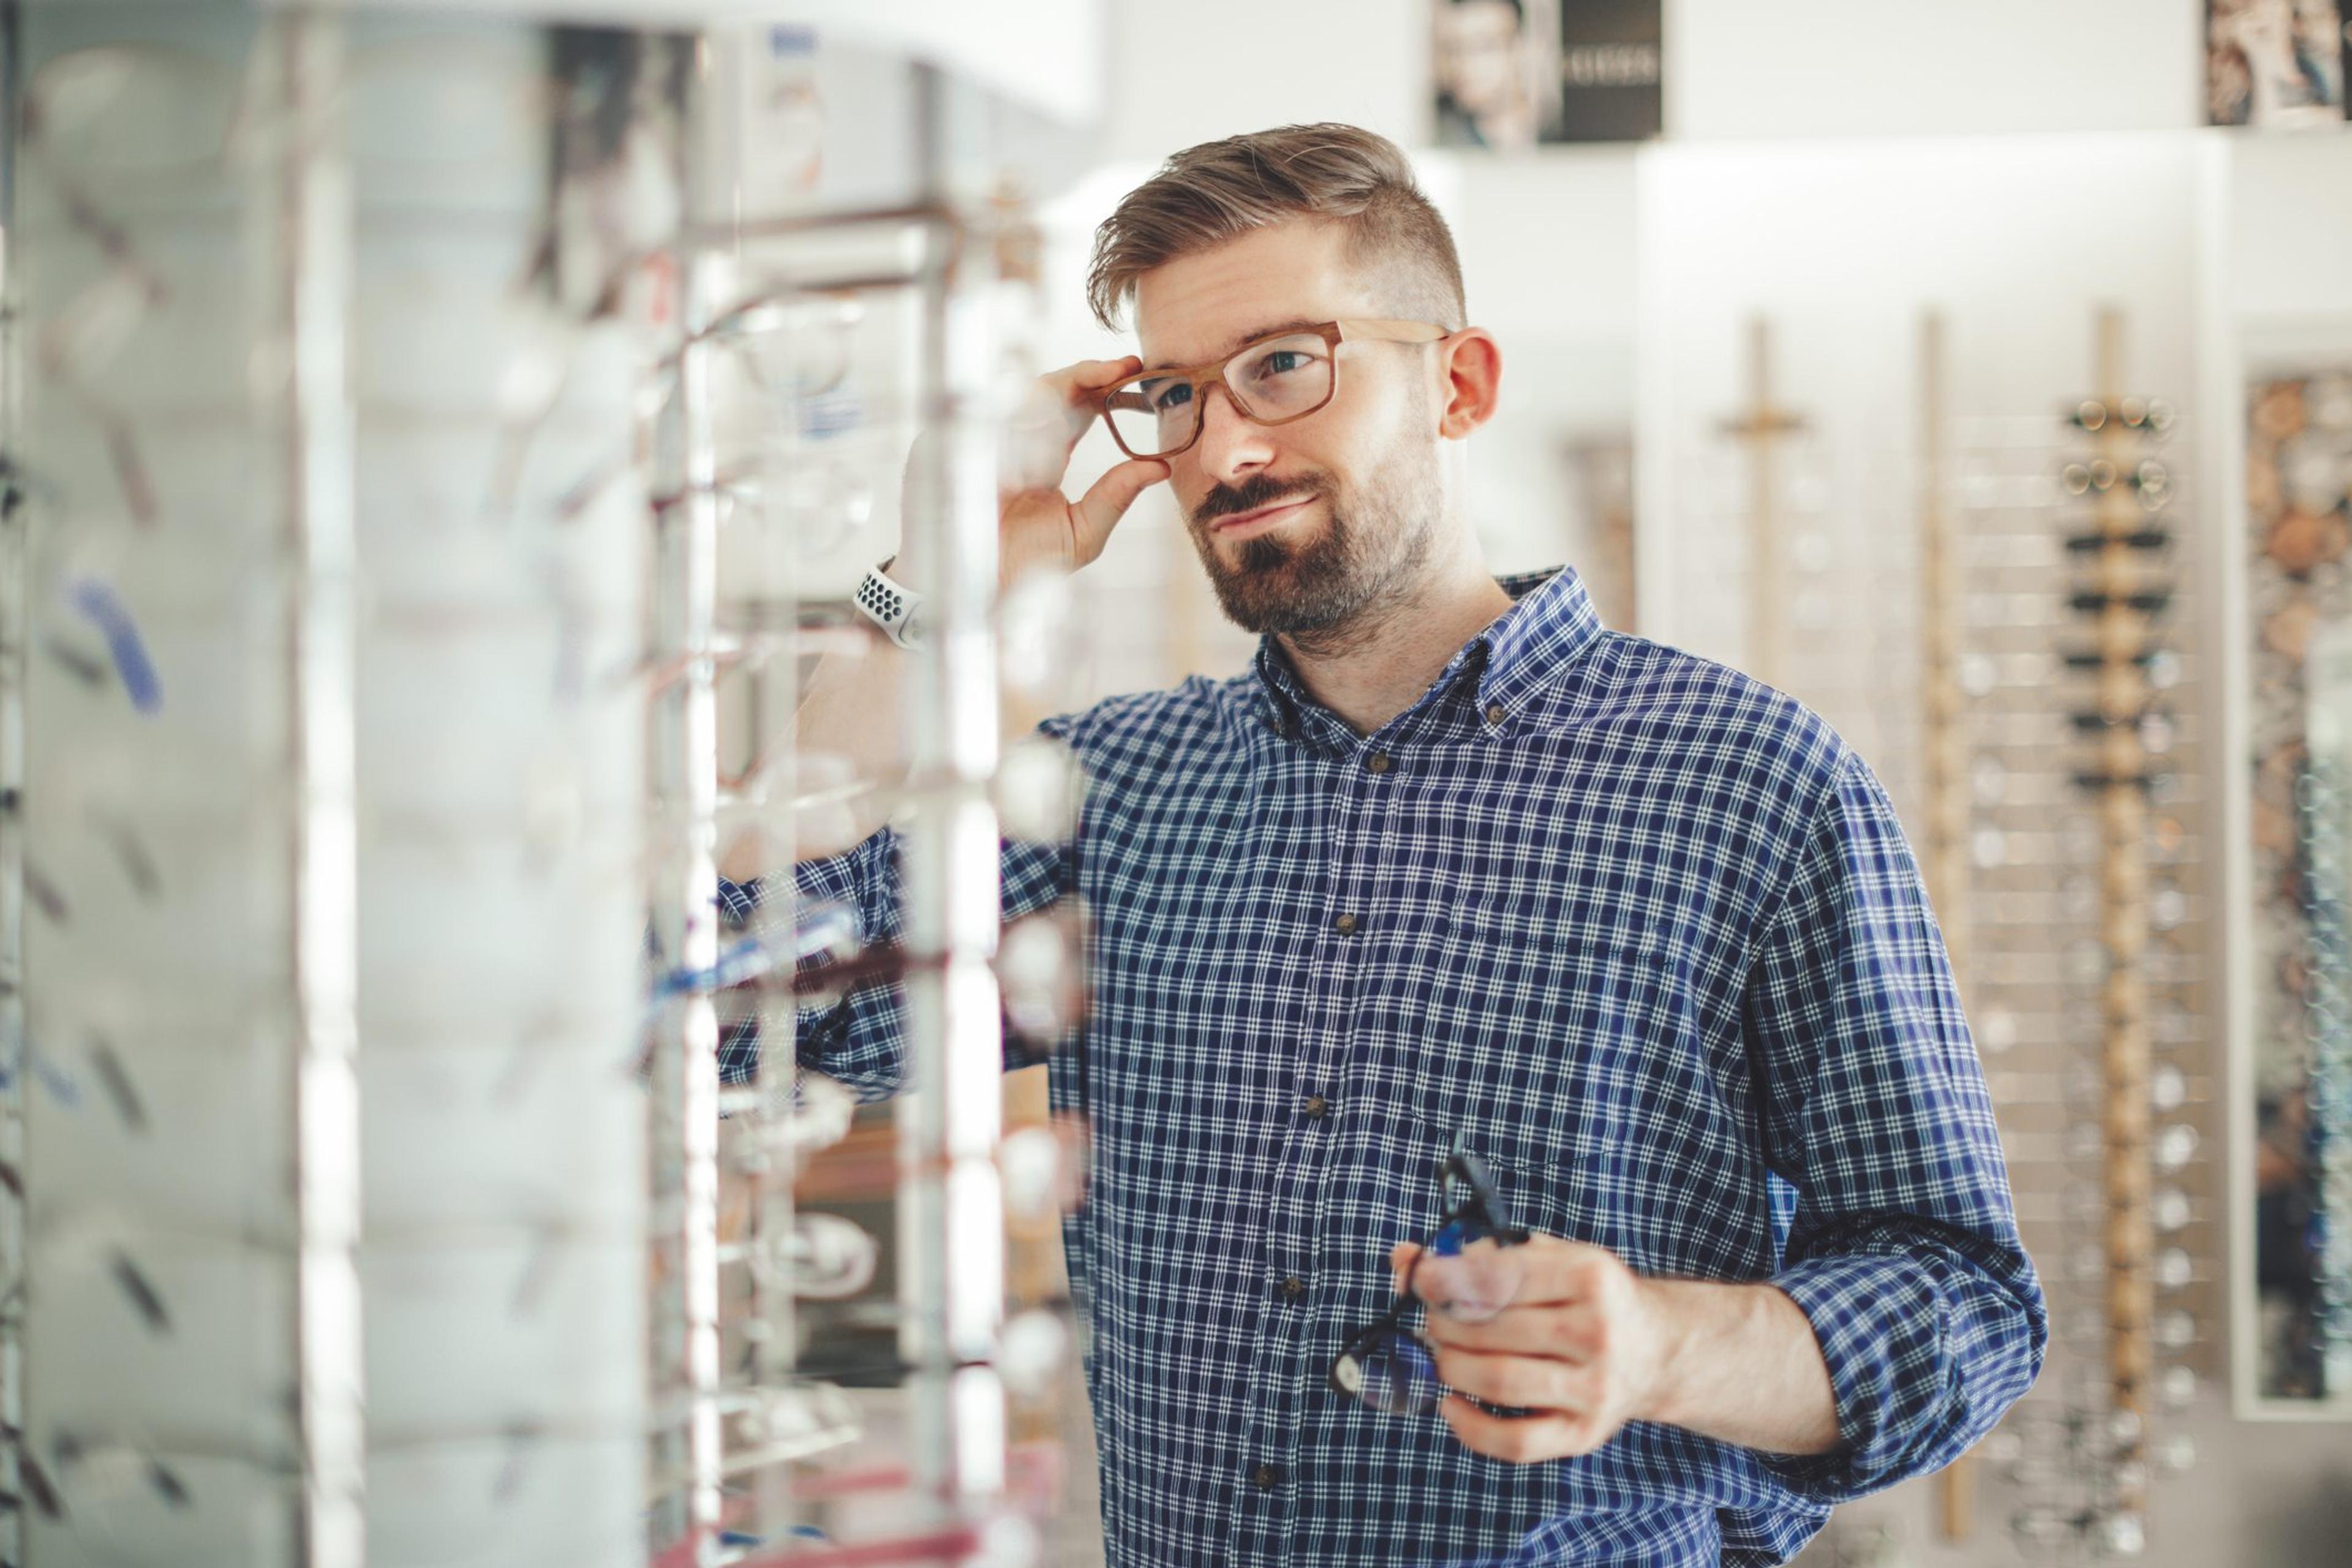 Man tries on glasses at the store and uses his Health Savings Account to buy them